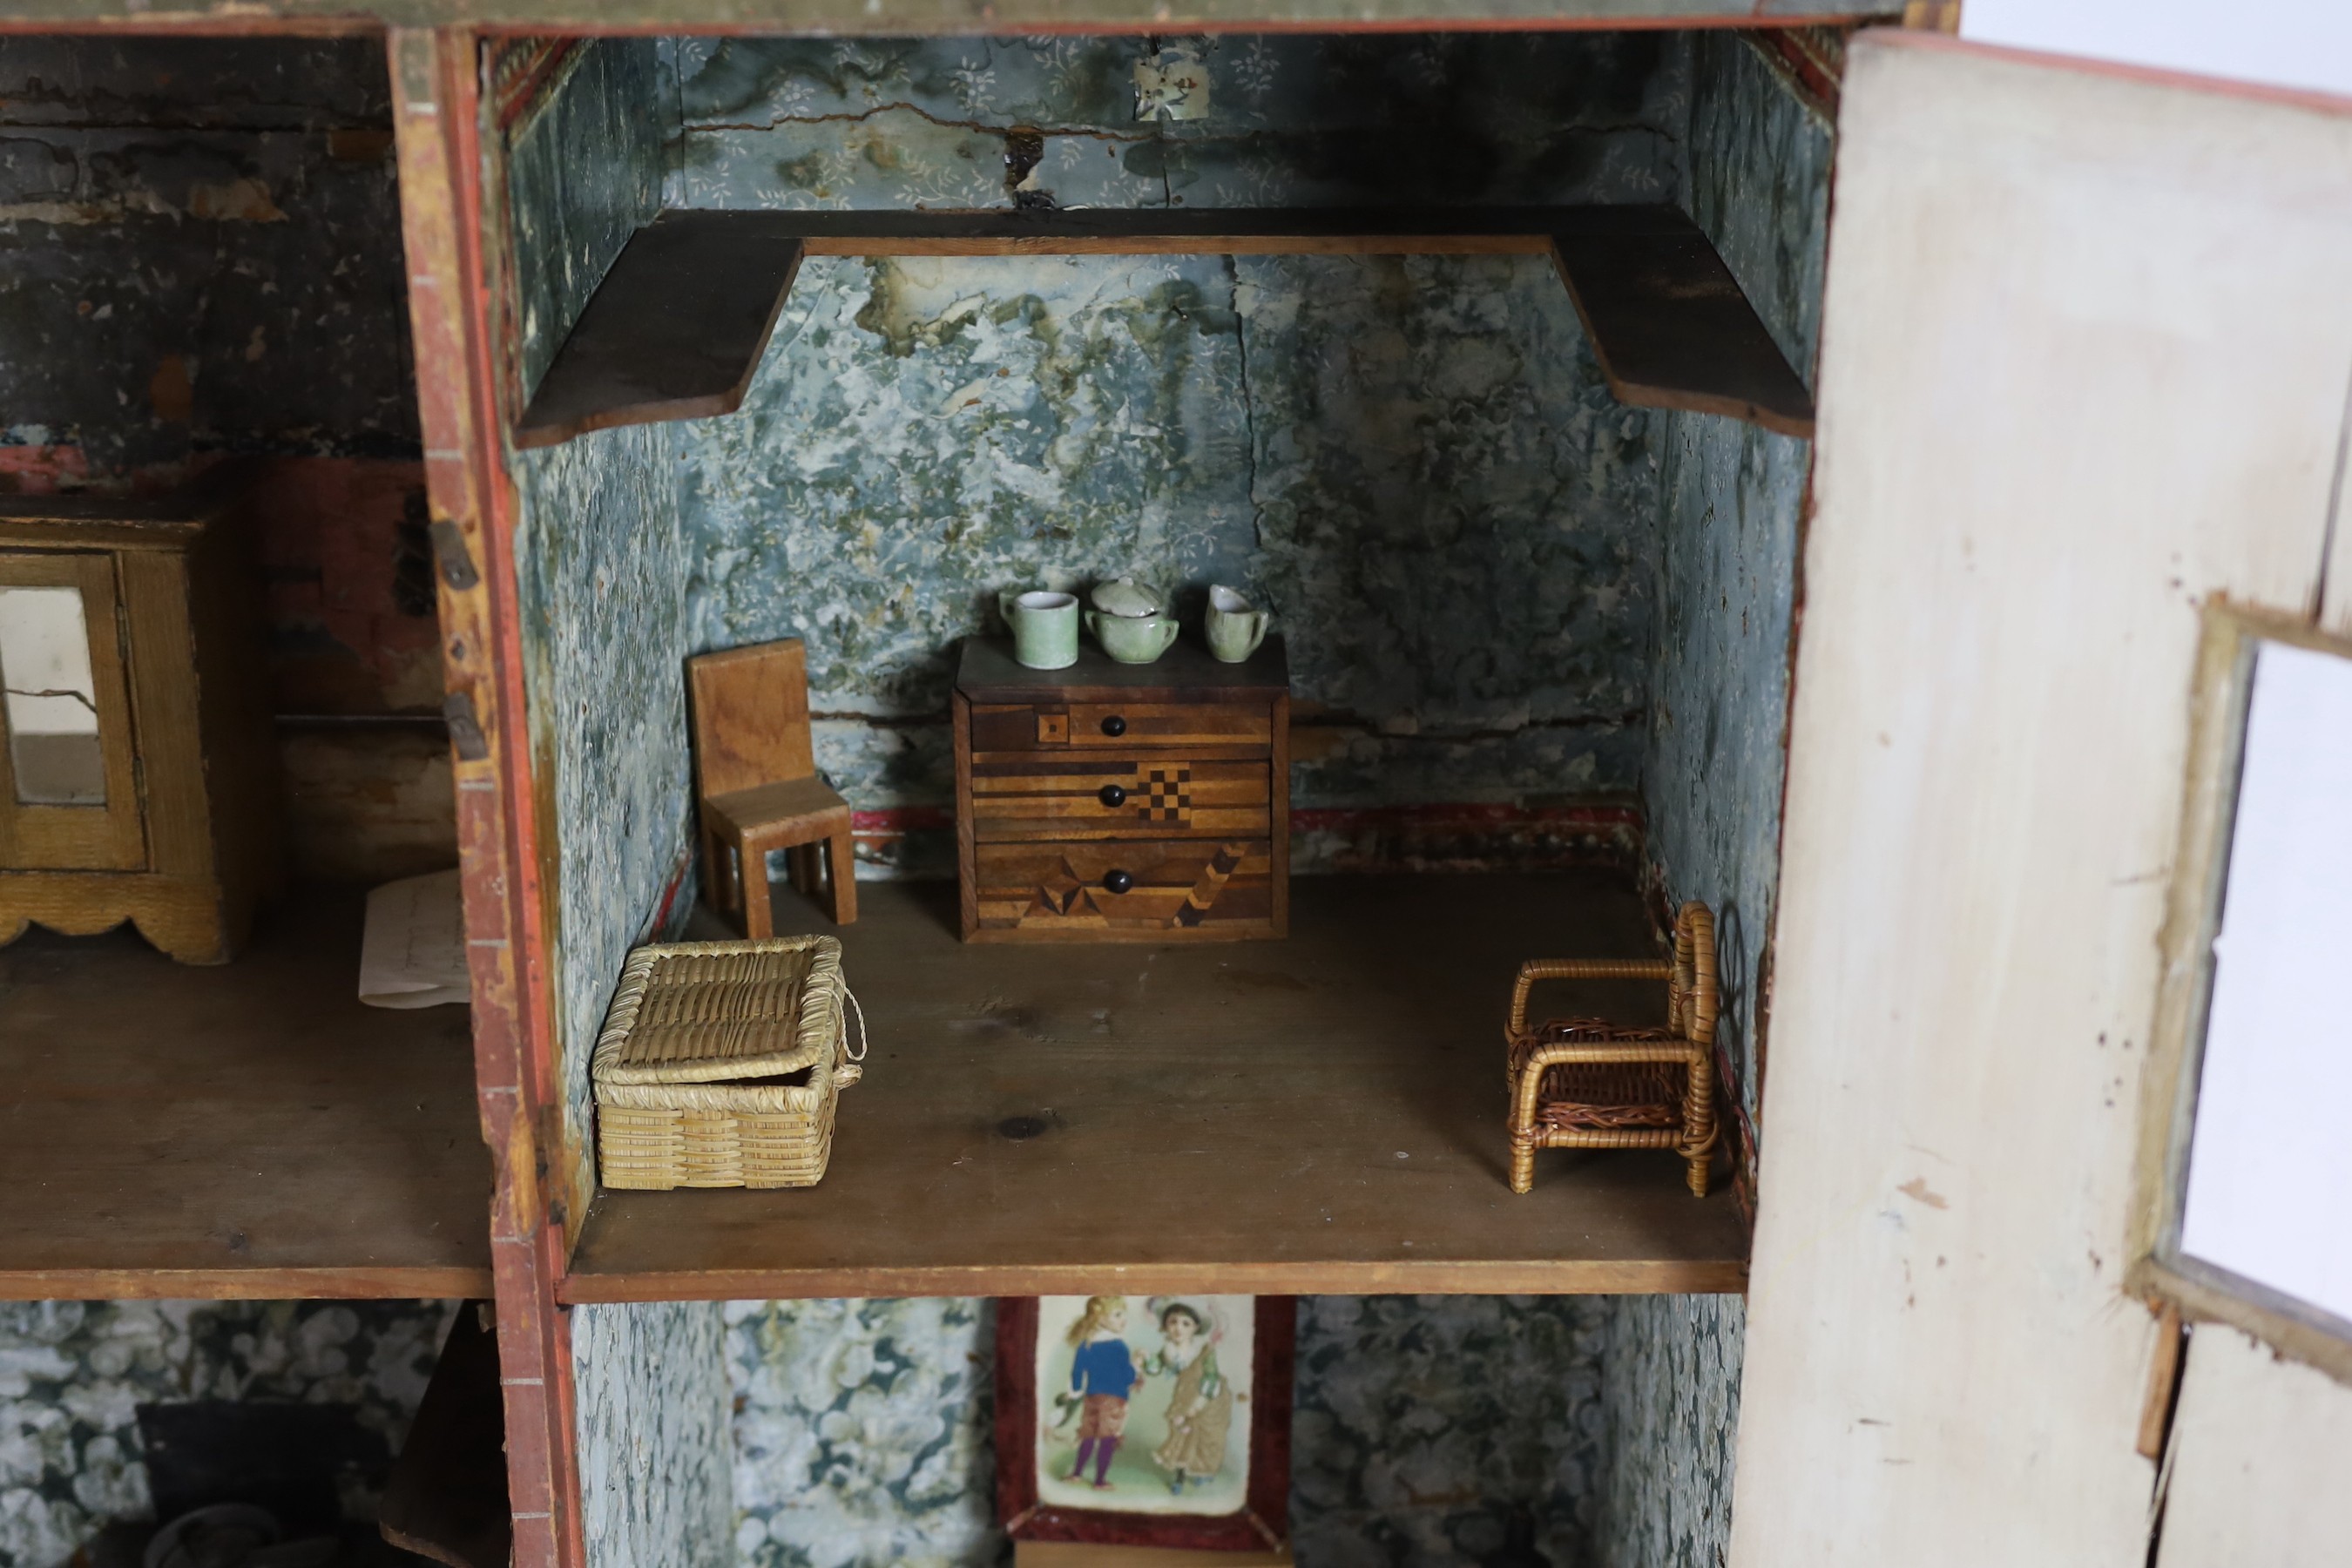 'Wingate House': An English cupboard house, early 19th century